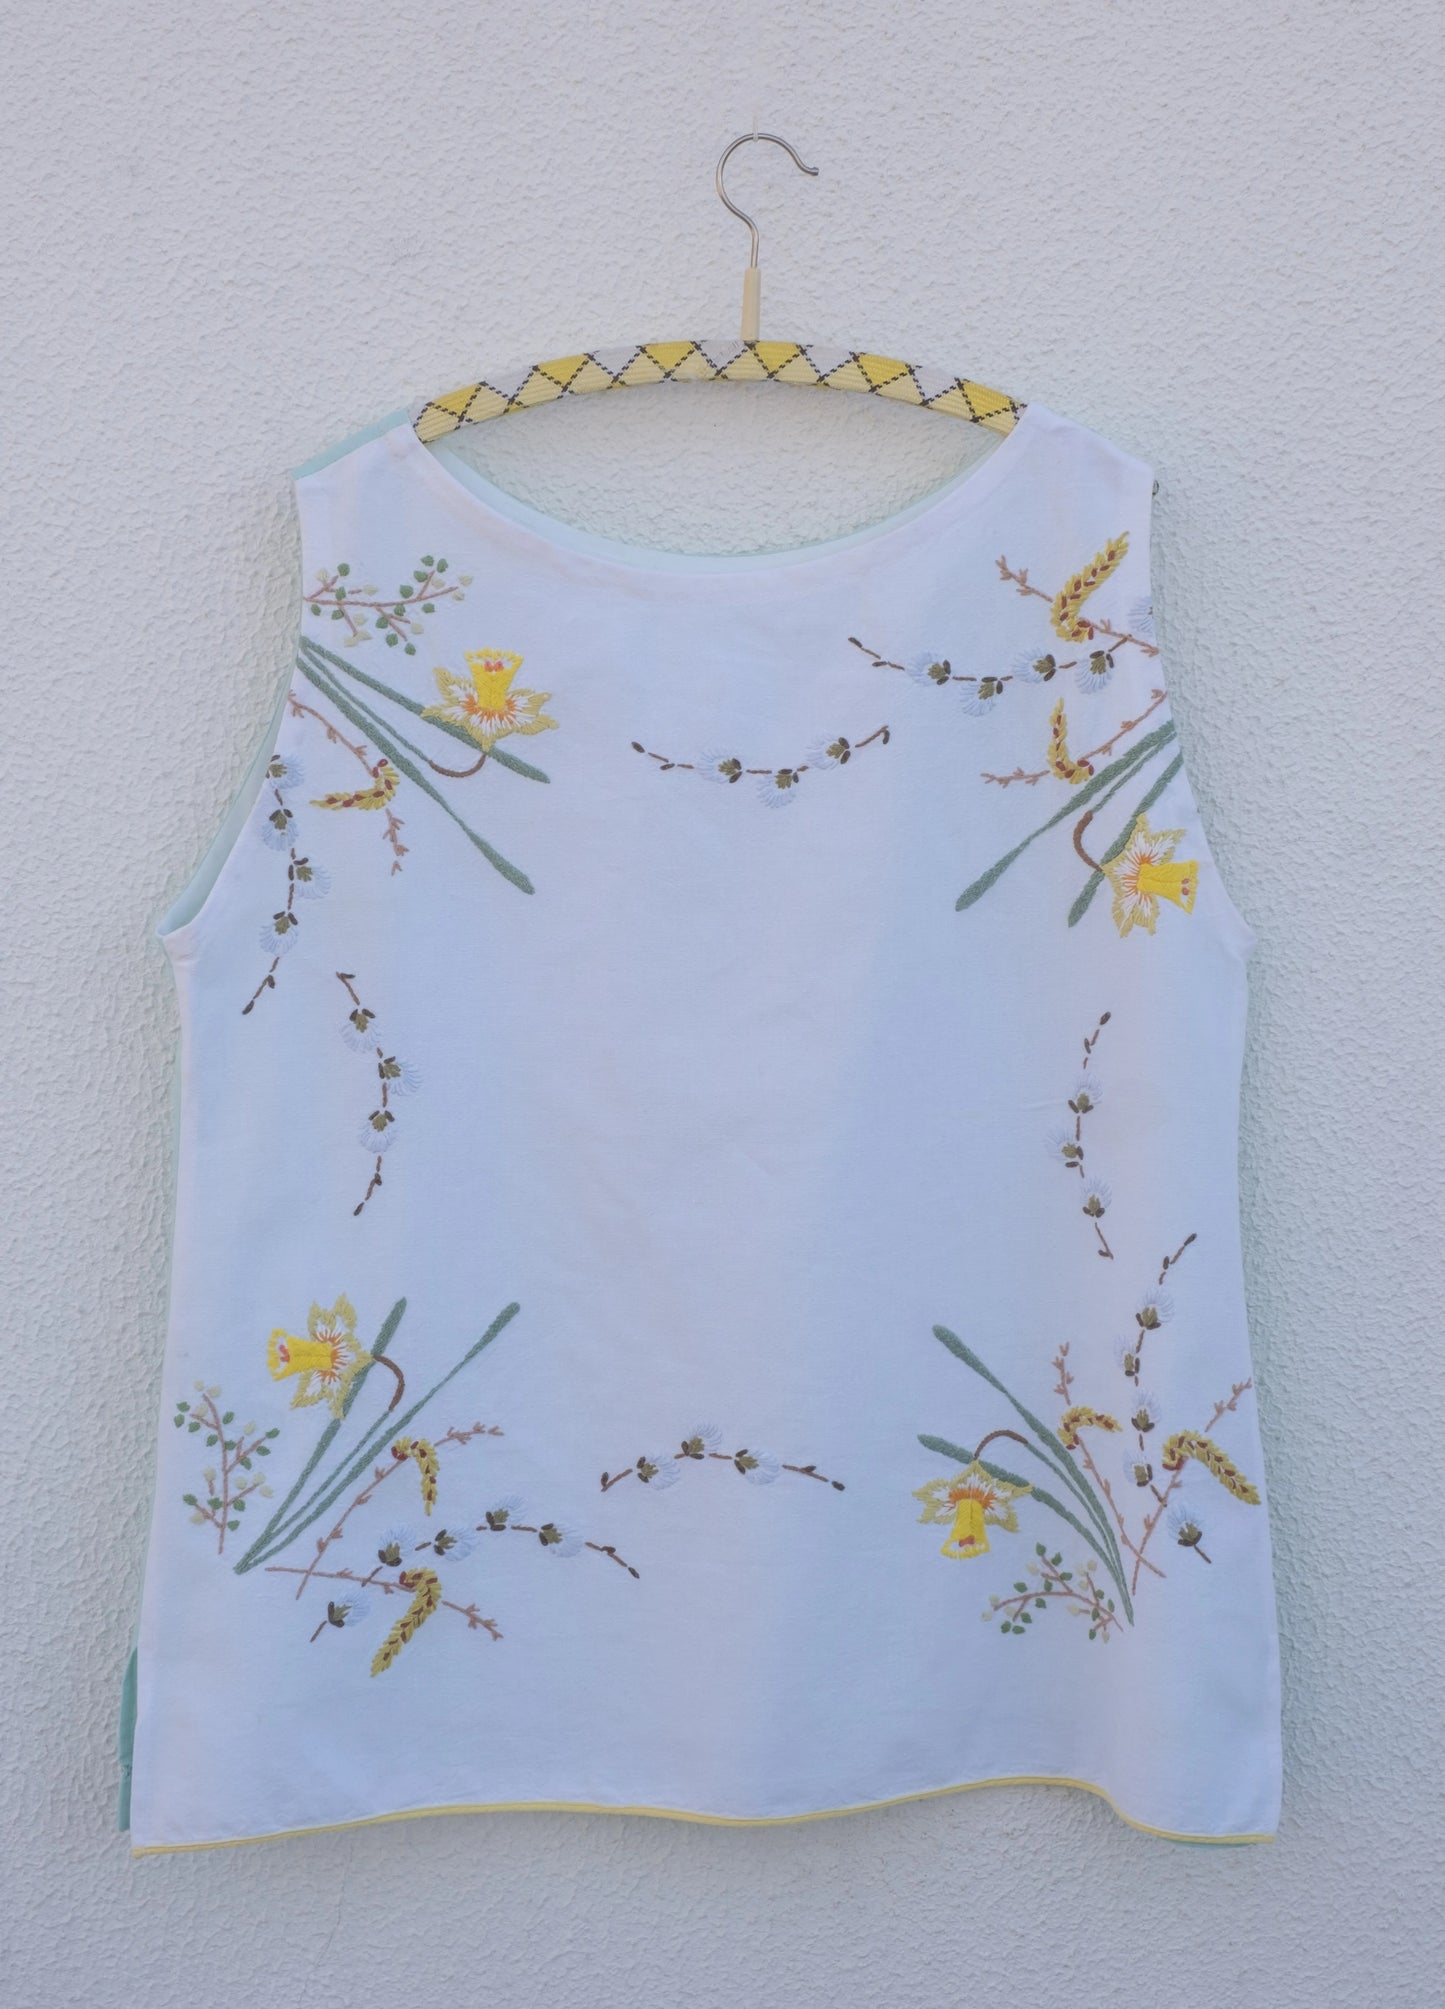 REVERSIBLE DAFFODIL FLORAL SLEEVELESS TOP